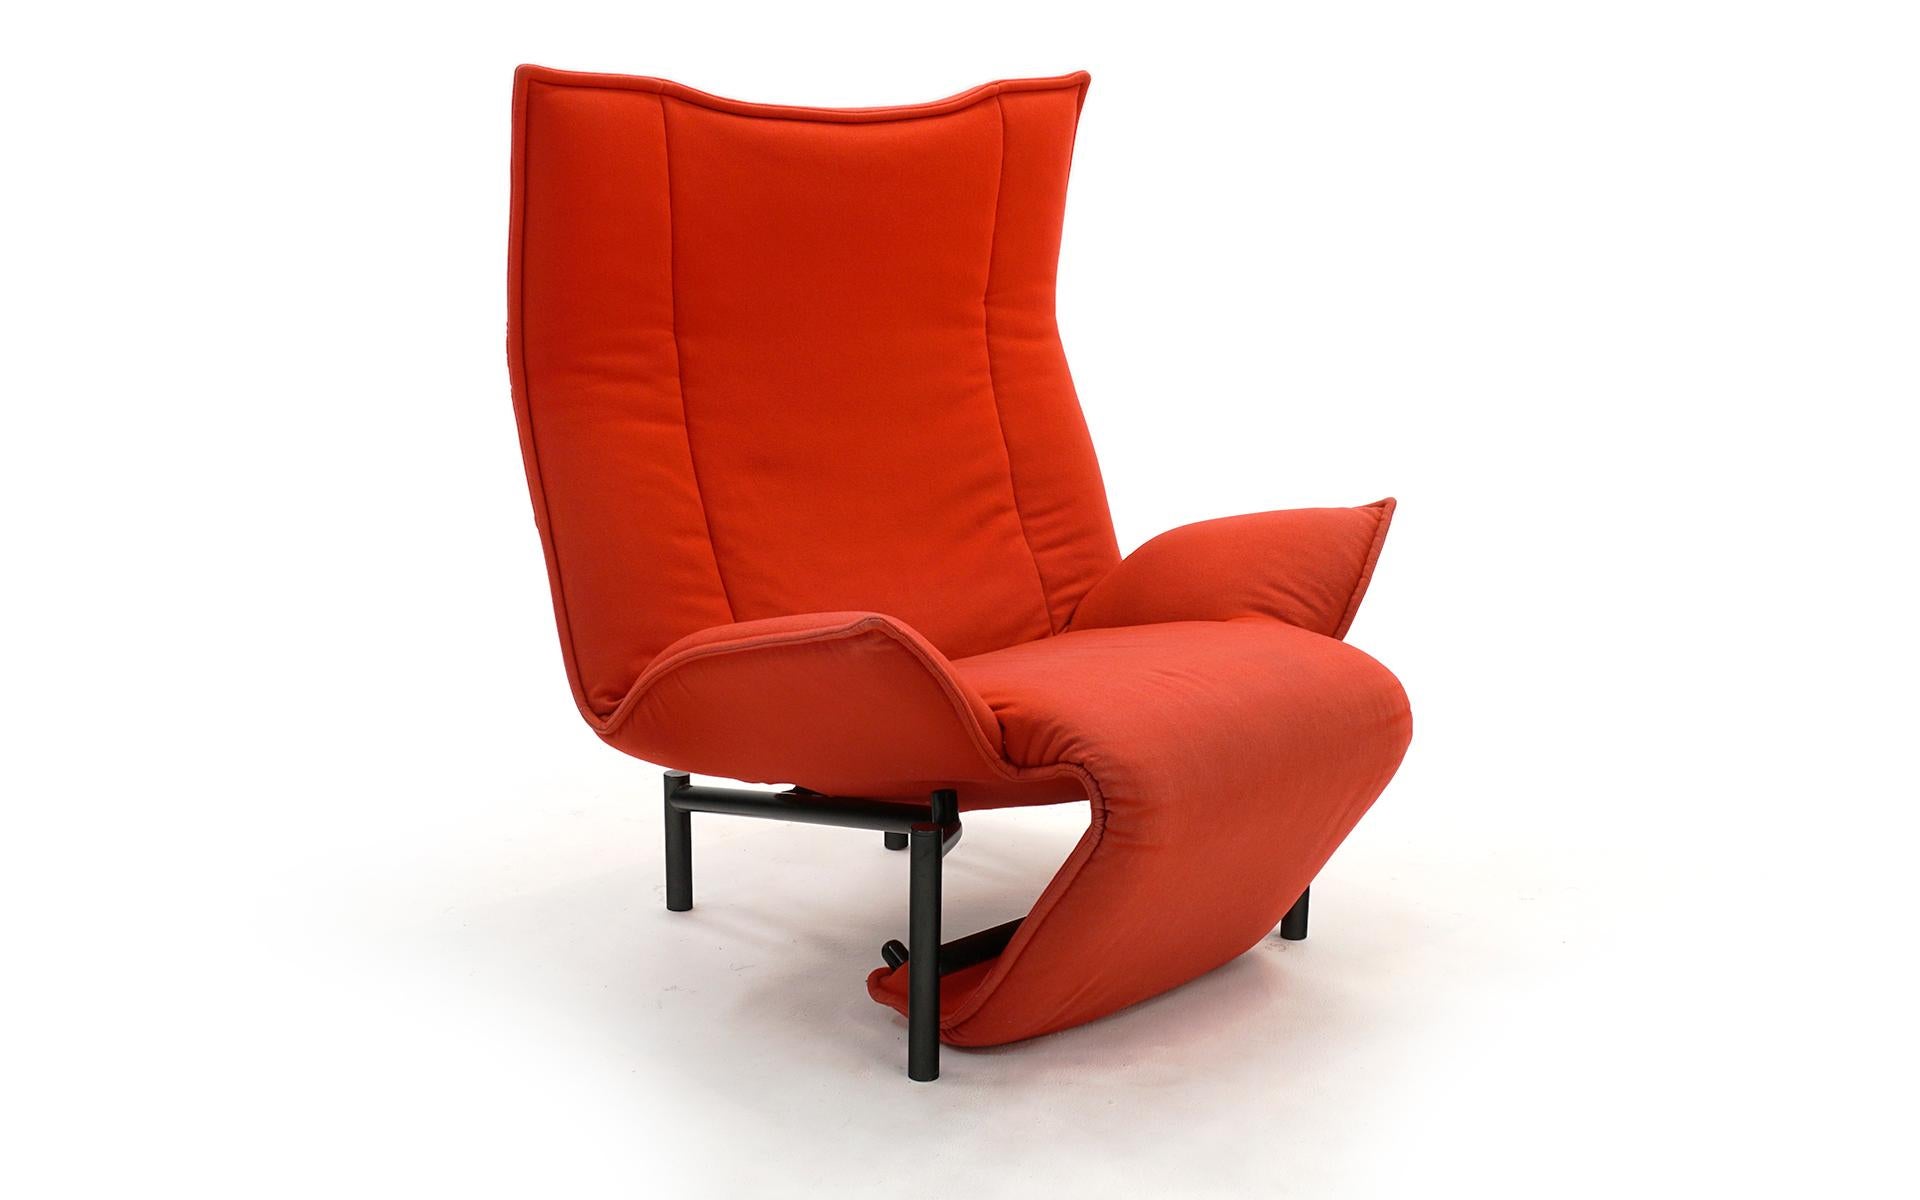 Reclining Veranda Chaise lounge designed by Vico Magistretti for Casina. Original red upholstery with black powder coated steel frame. The foot rest portion pulls out from under the chair as seen in the photos. The back adjusts / reclines to any